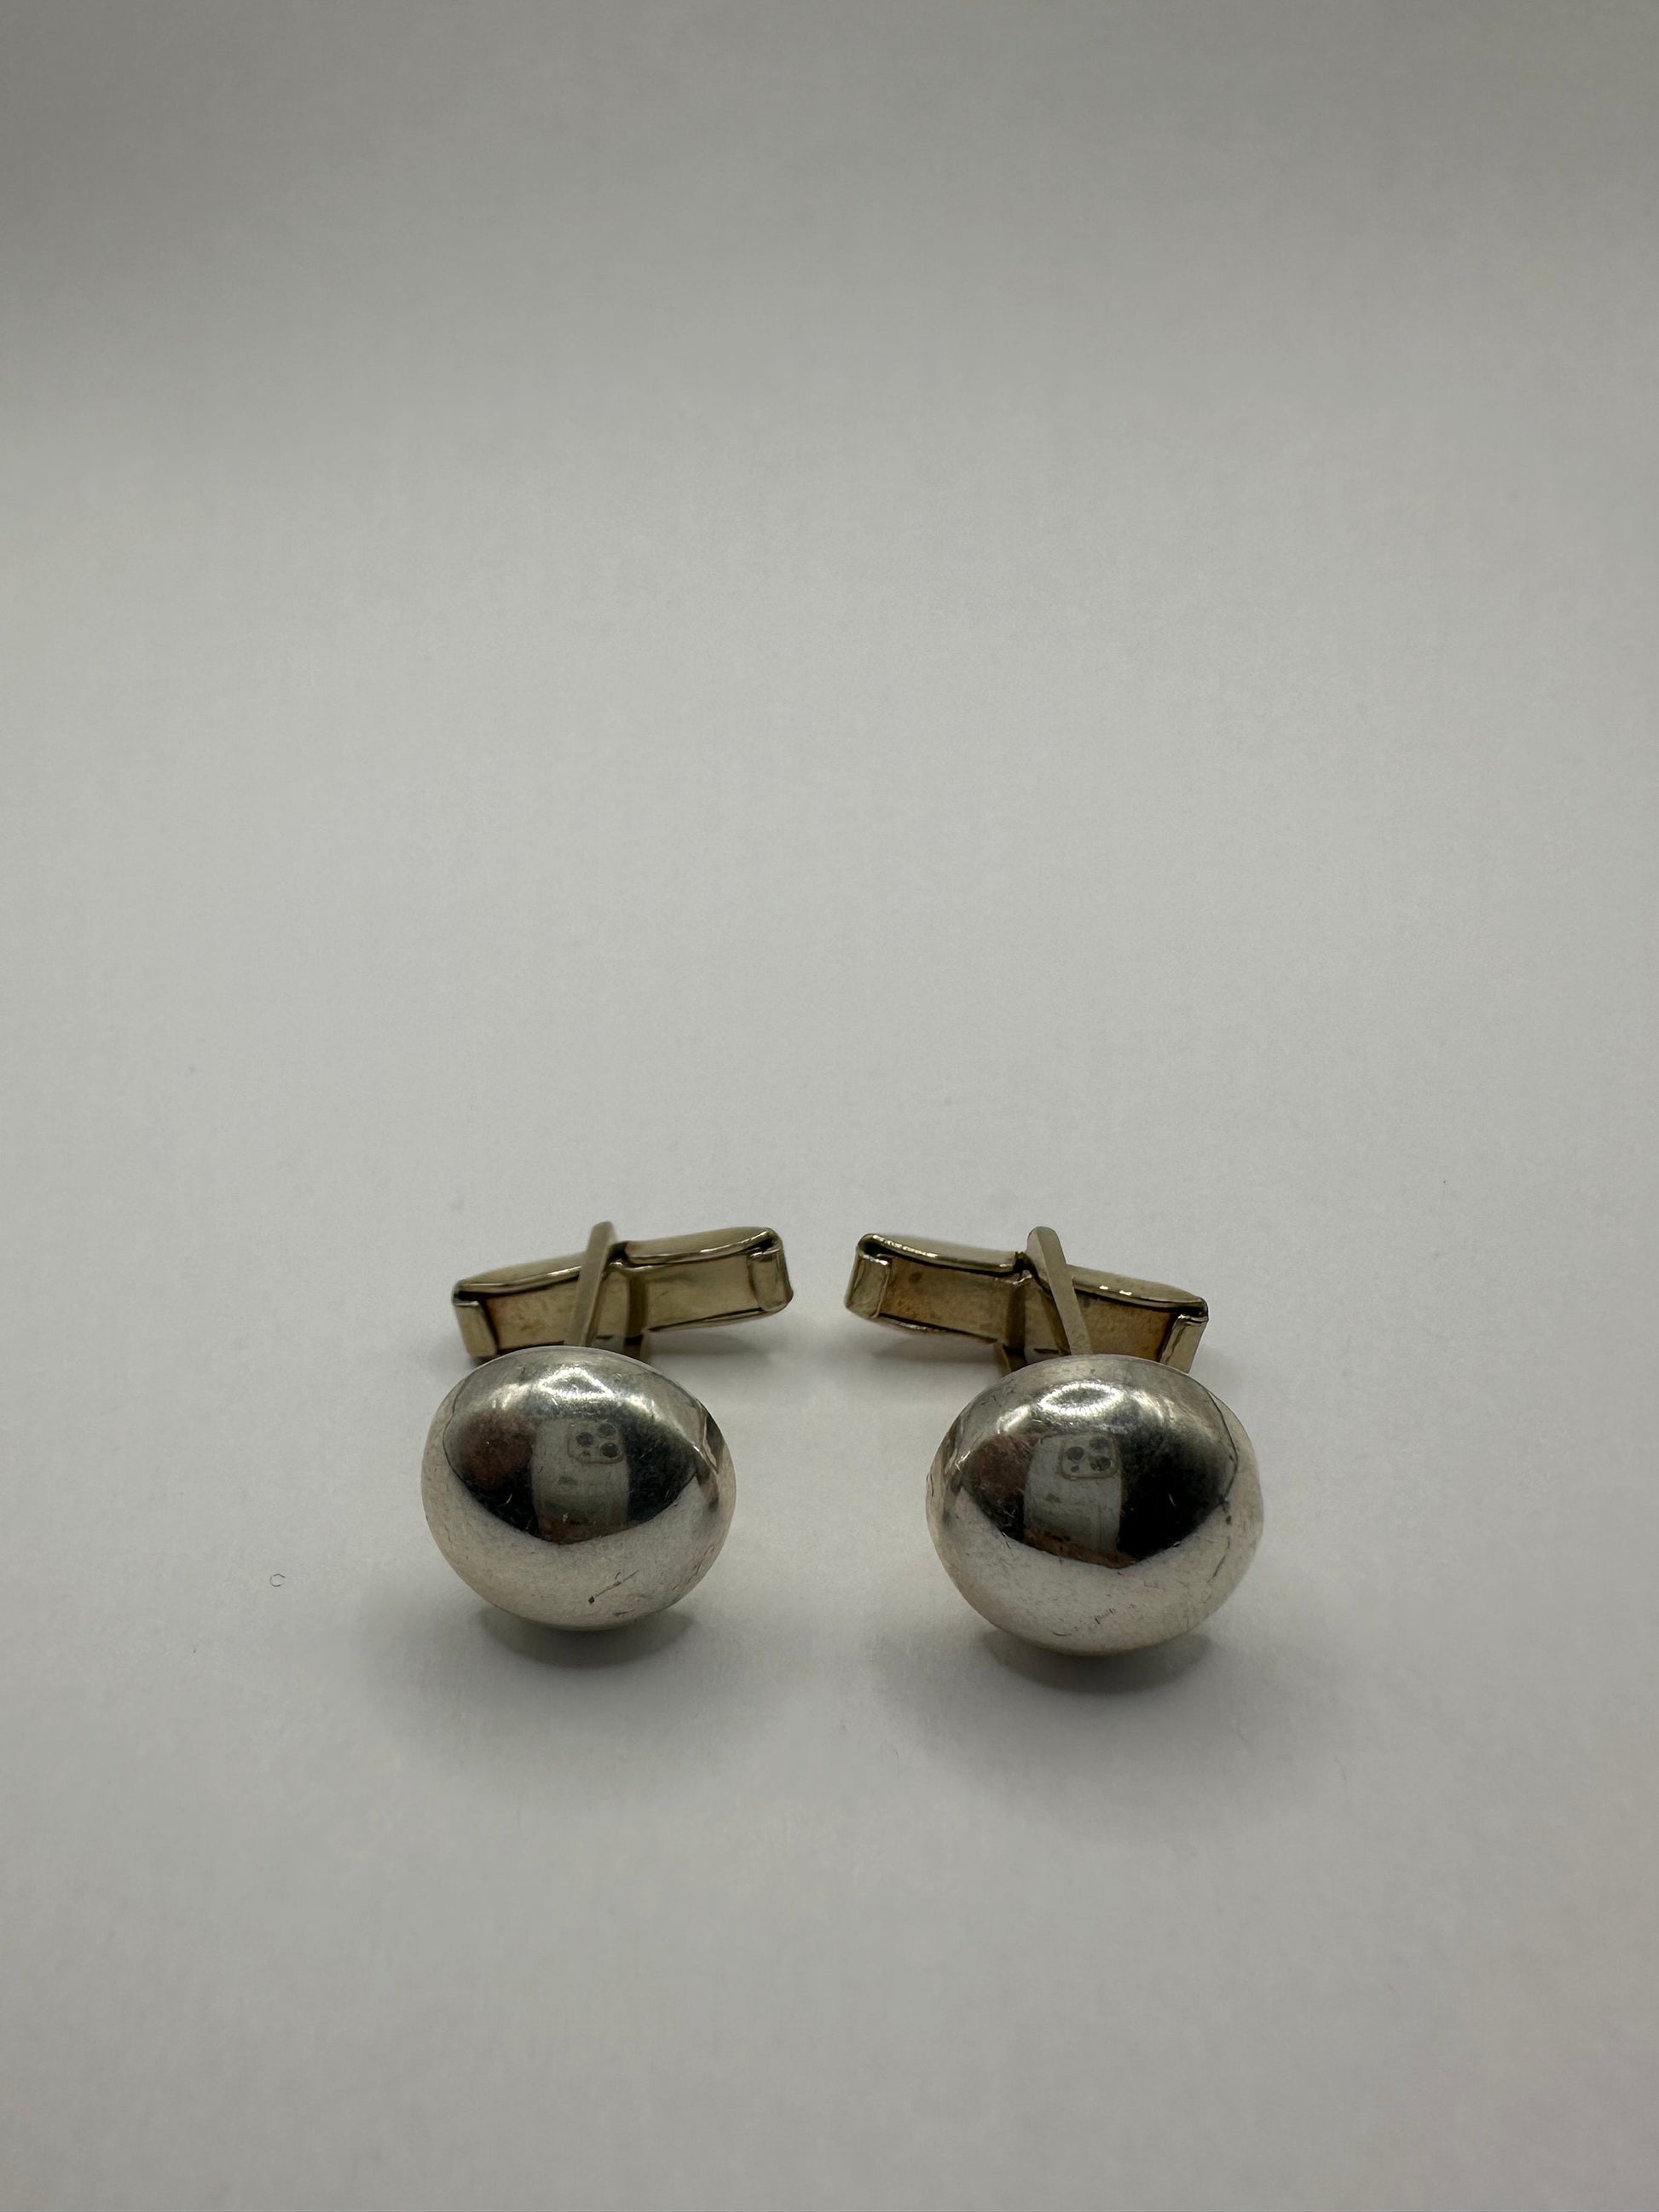 Vintage Cuff Links 925 Sterling Silver